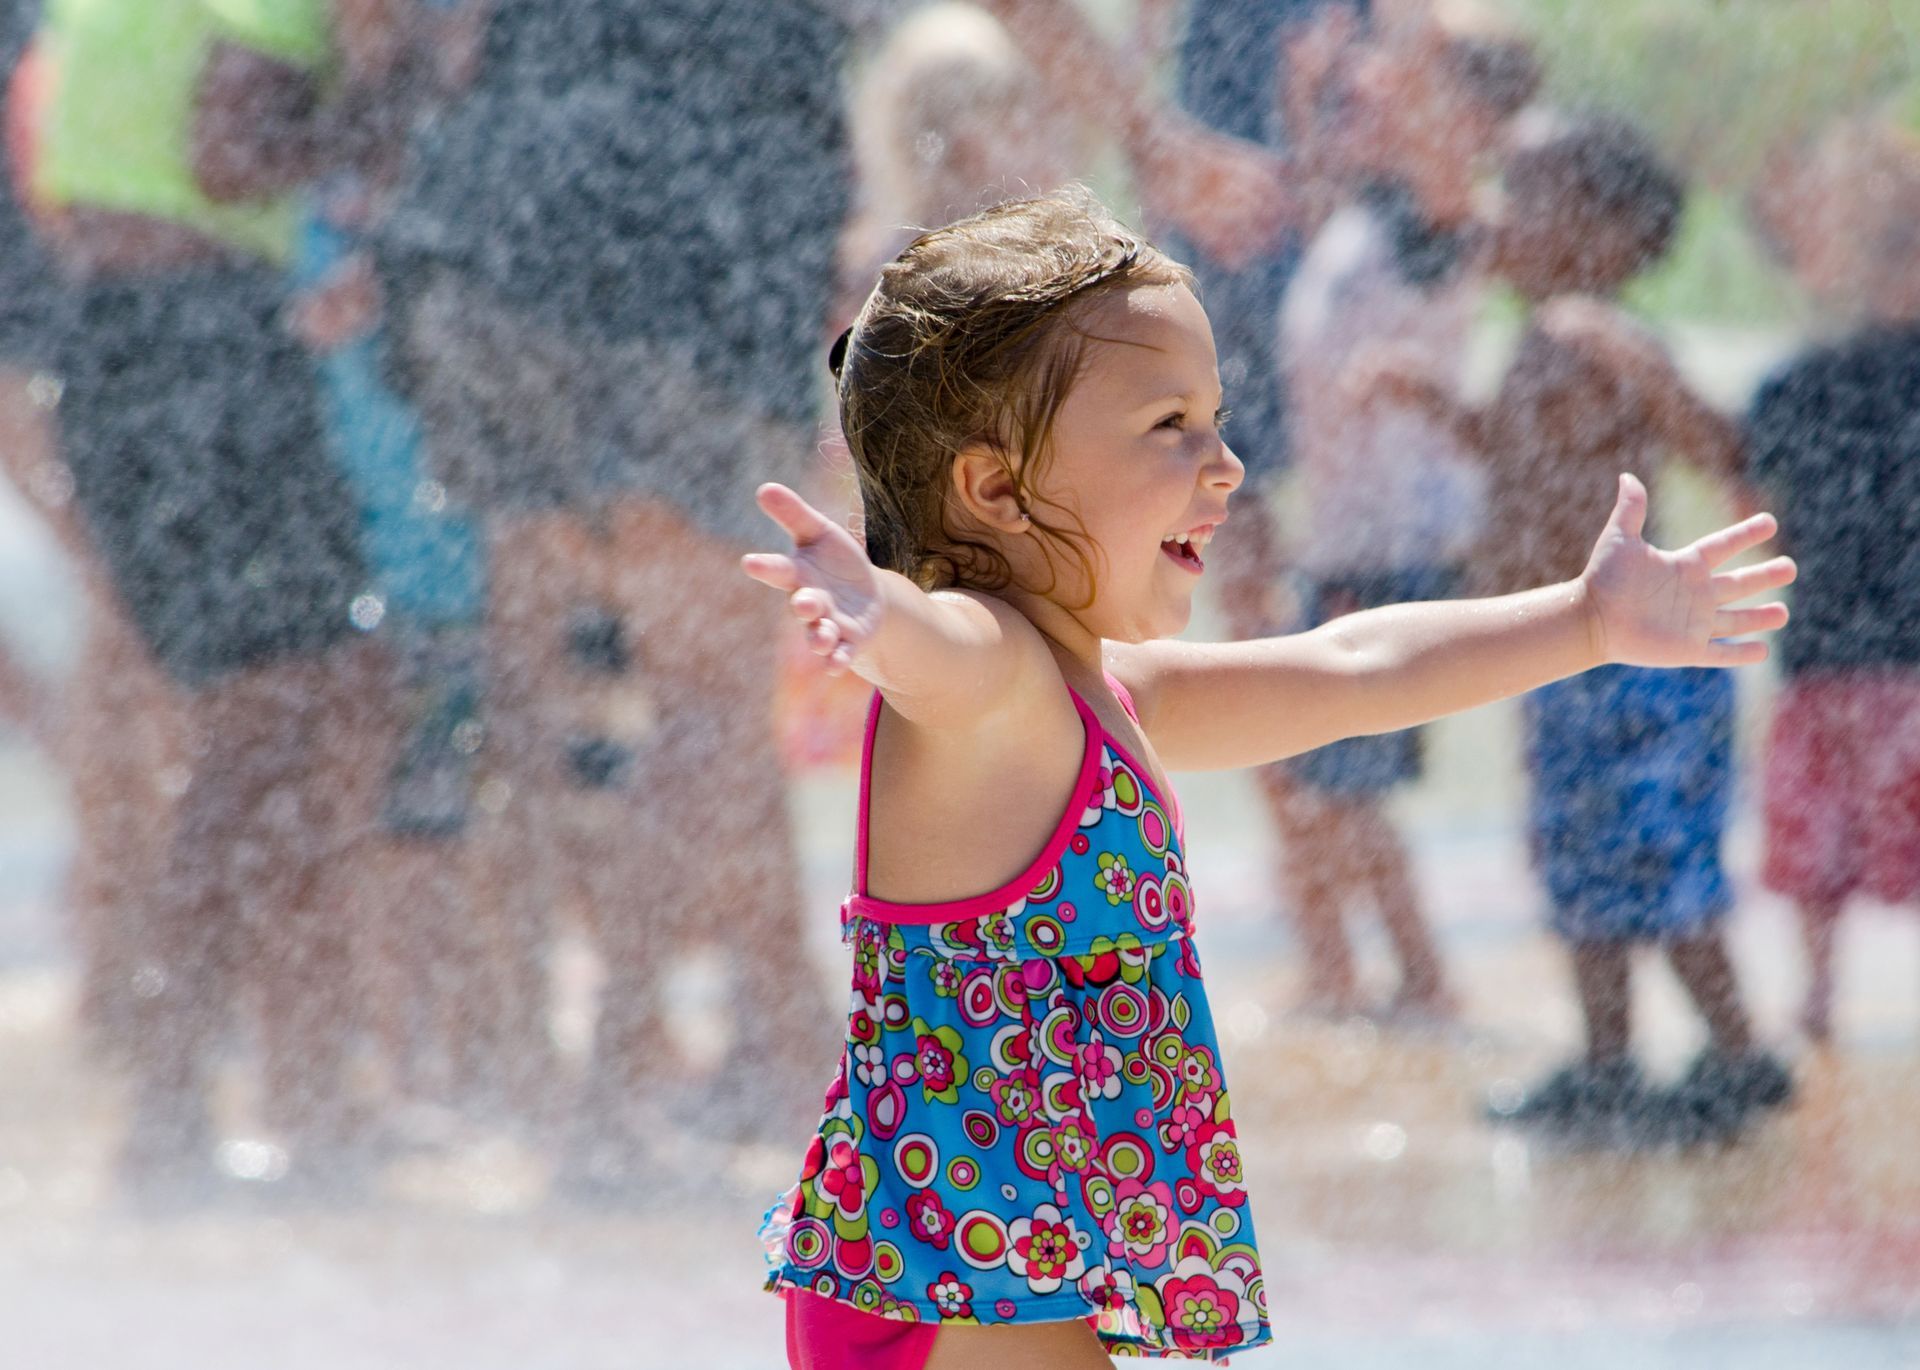 A little girl is playing in a water park with her arms outstretched.